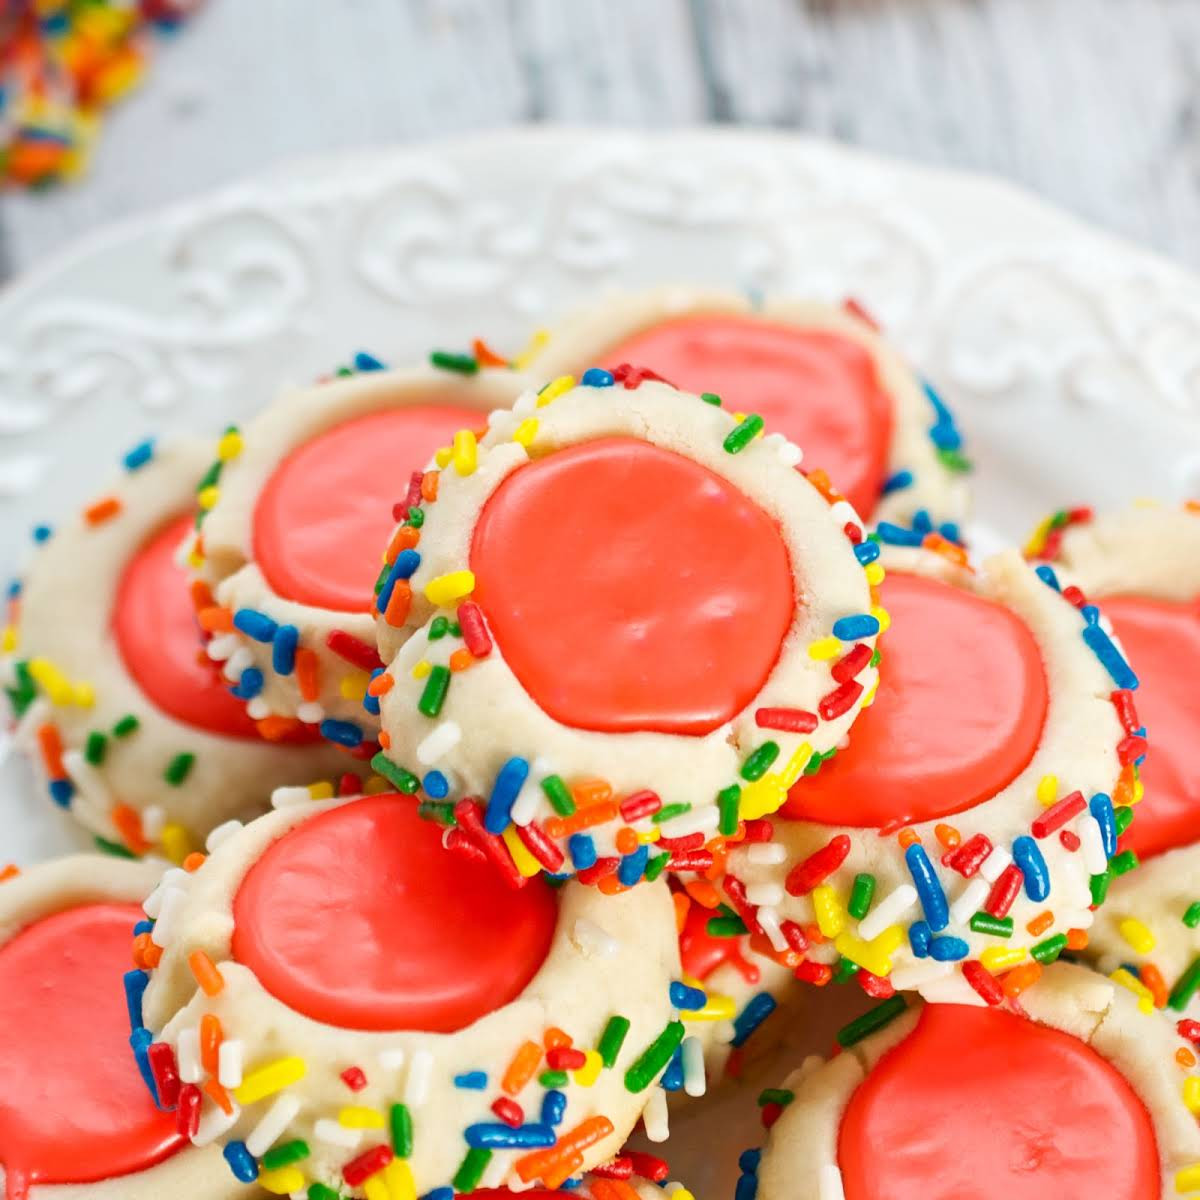 Thumbprint Cookies With Icing
 10 Best Thumbprint Cookies With Icing Recipes